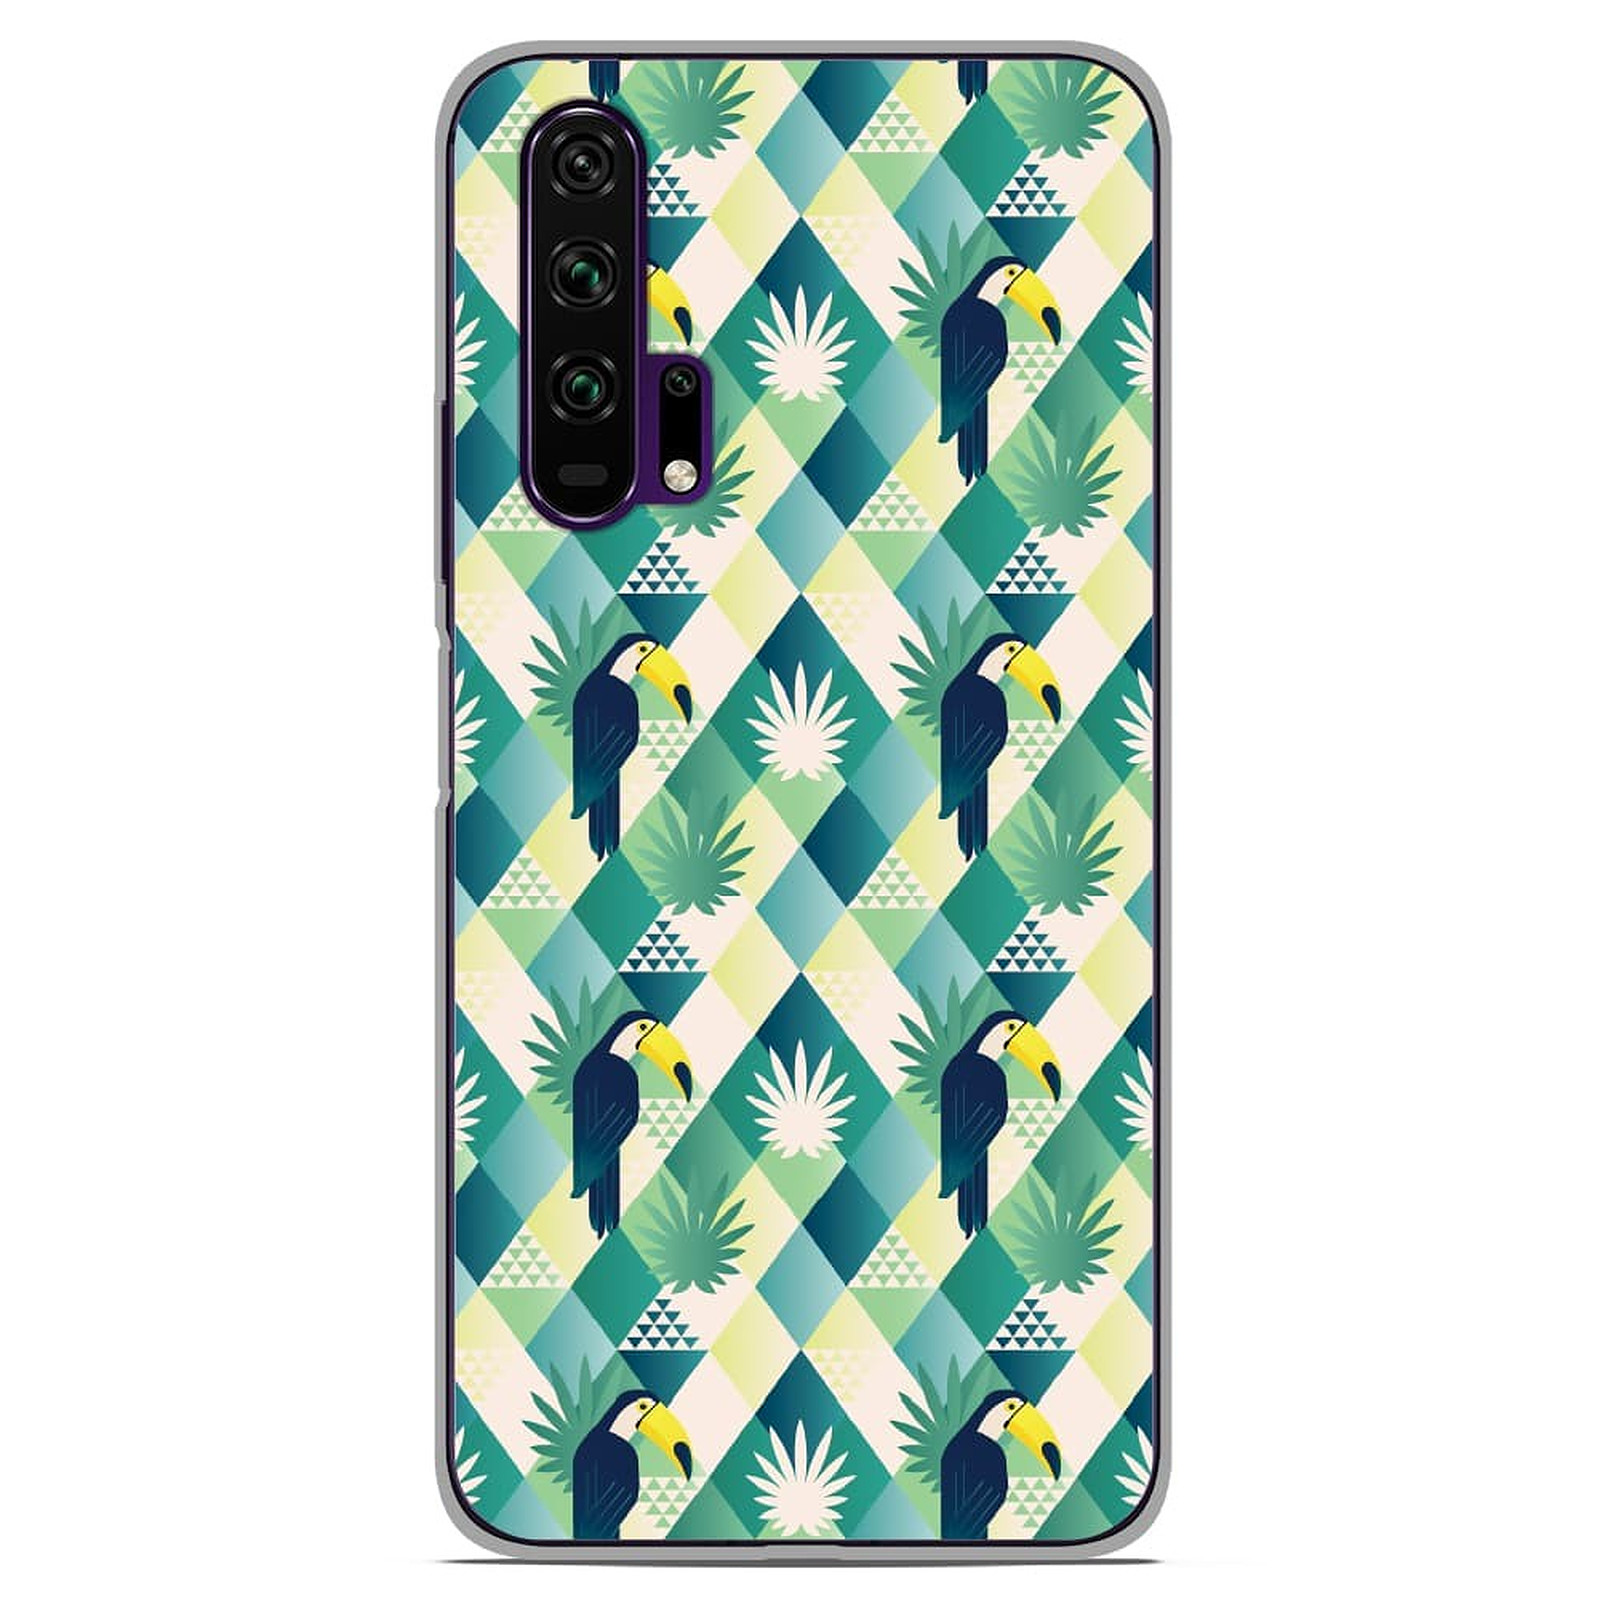 1001 Coques Coque silicone gel Huawei Honor 20 Pro motif Toucan losange - Coque telephone 1001Coques